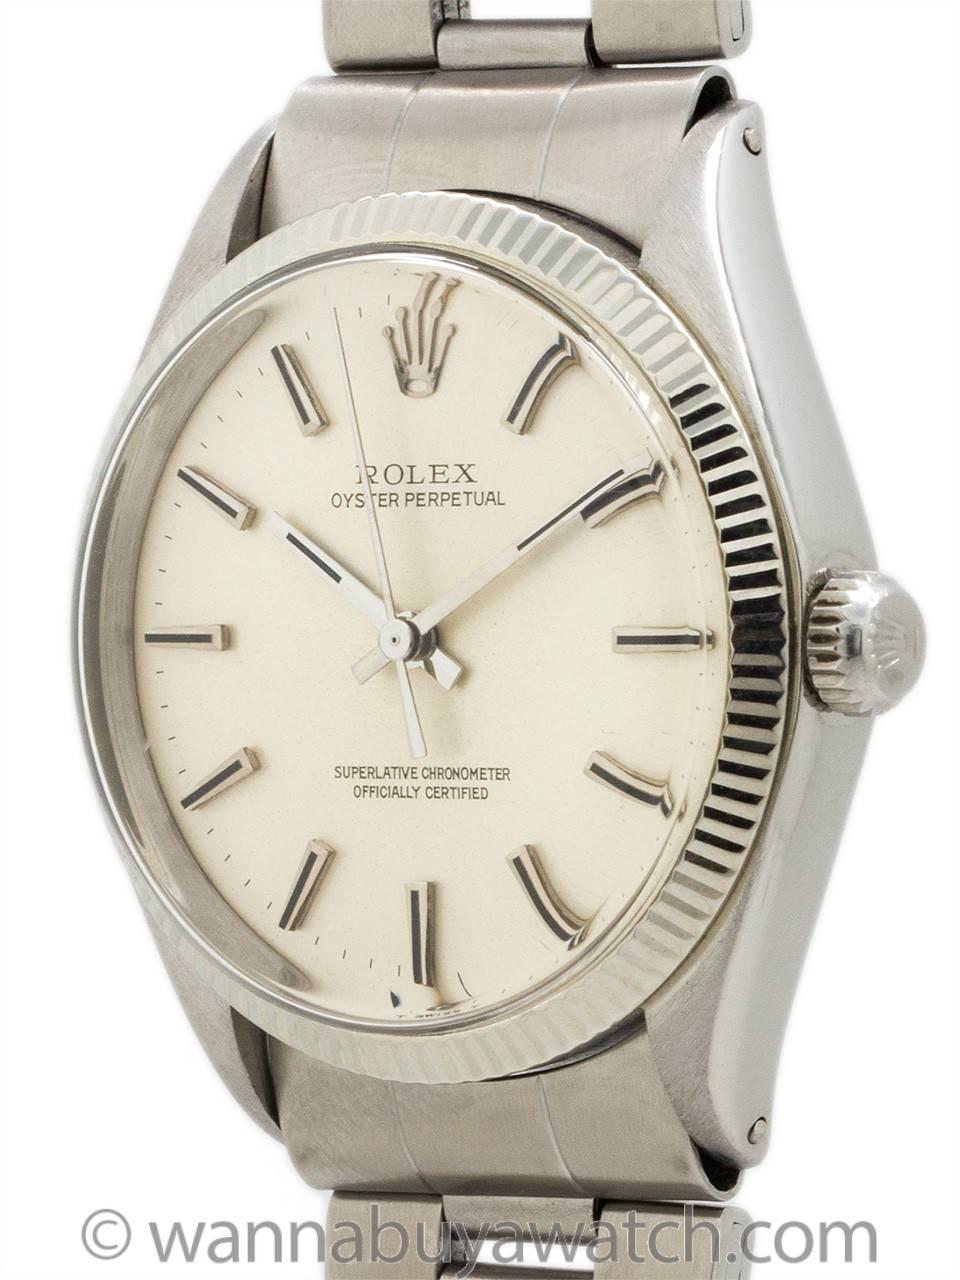 Rolex Oyster Perpetual ref 1005 circa 1971. Makes a wonderful gift for commemoration of 1971 birthday or anniversary. Featuring 34mm diameter case with 14K white gold fluted bezel, acrylic crystal, and original silvered satin dial with applied